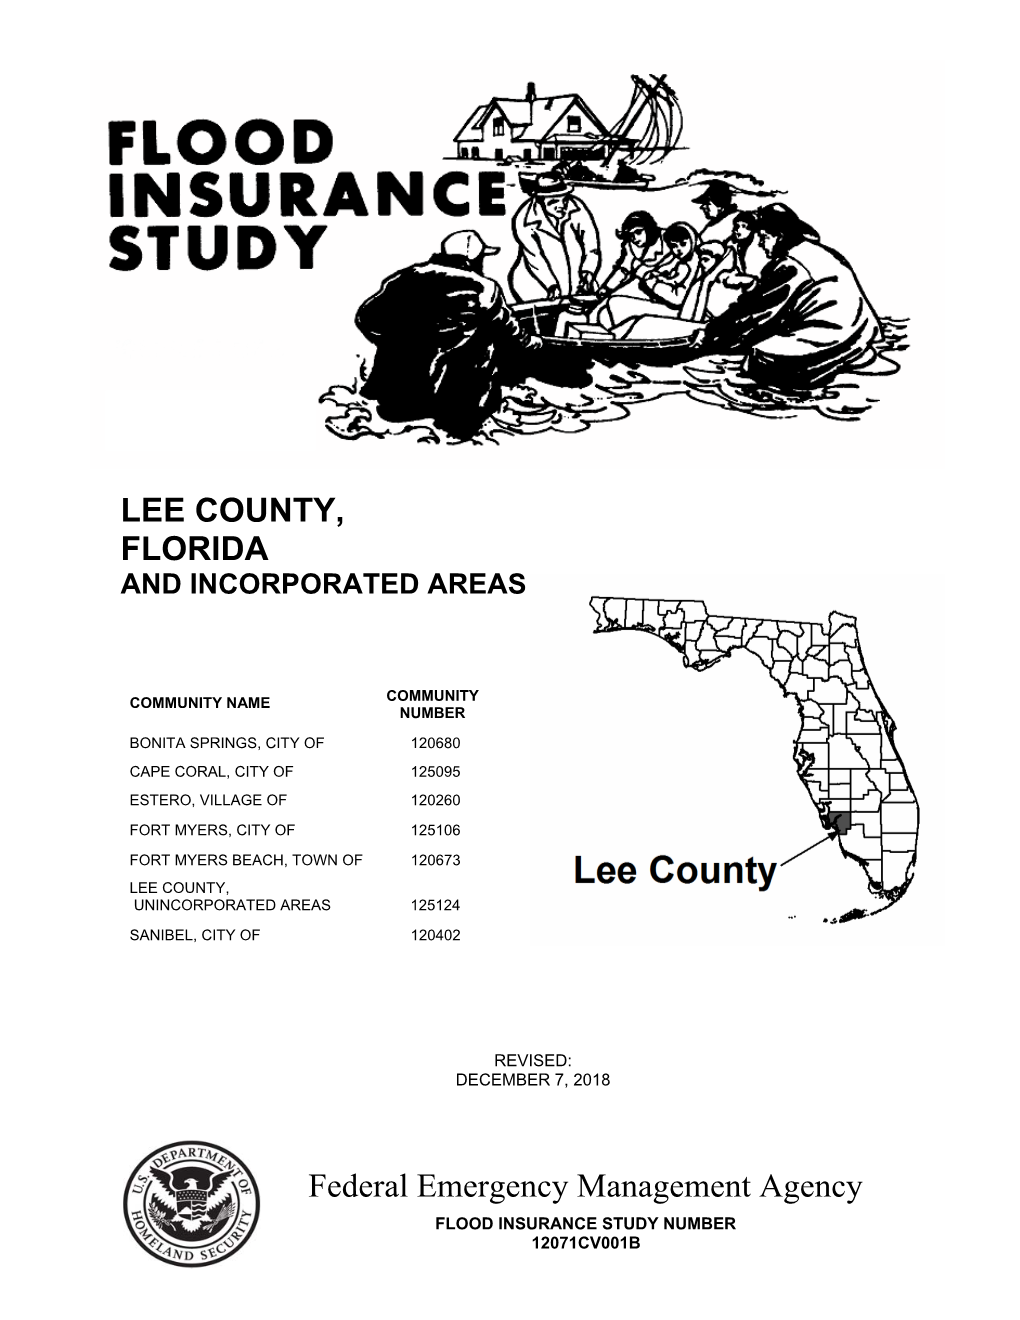 LEE COUNTY, FLORIDA Federal Emergency Management Agency